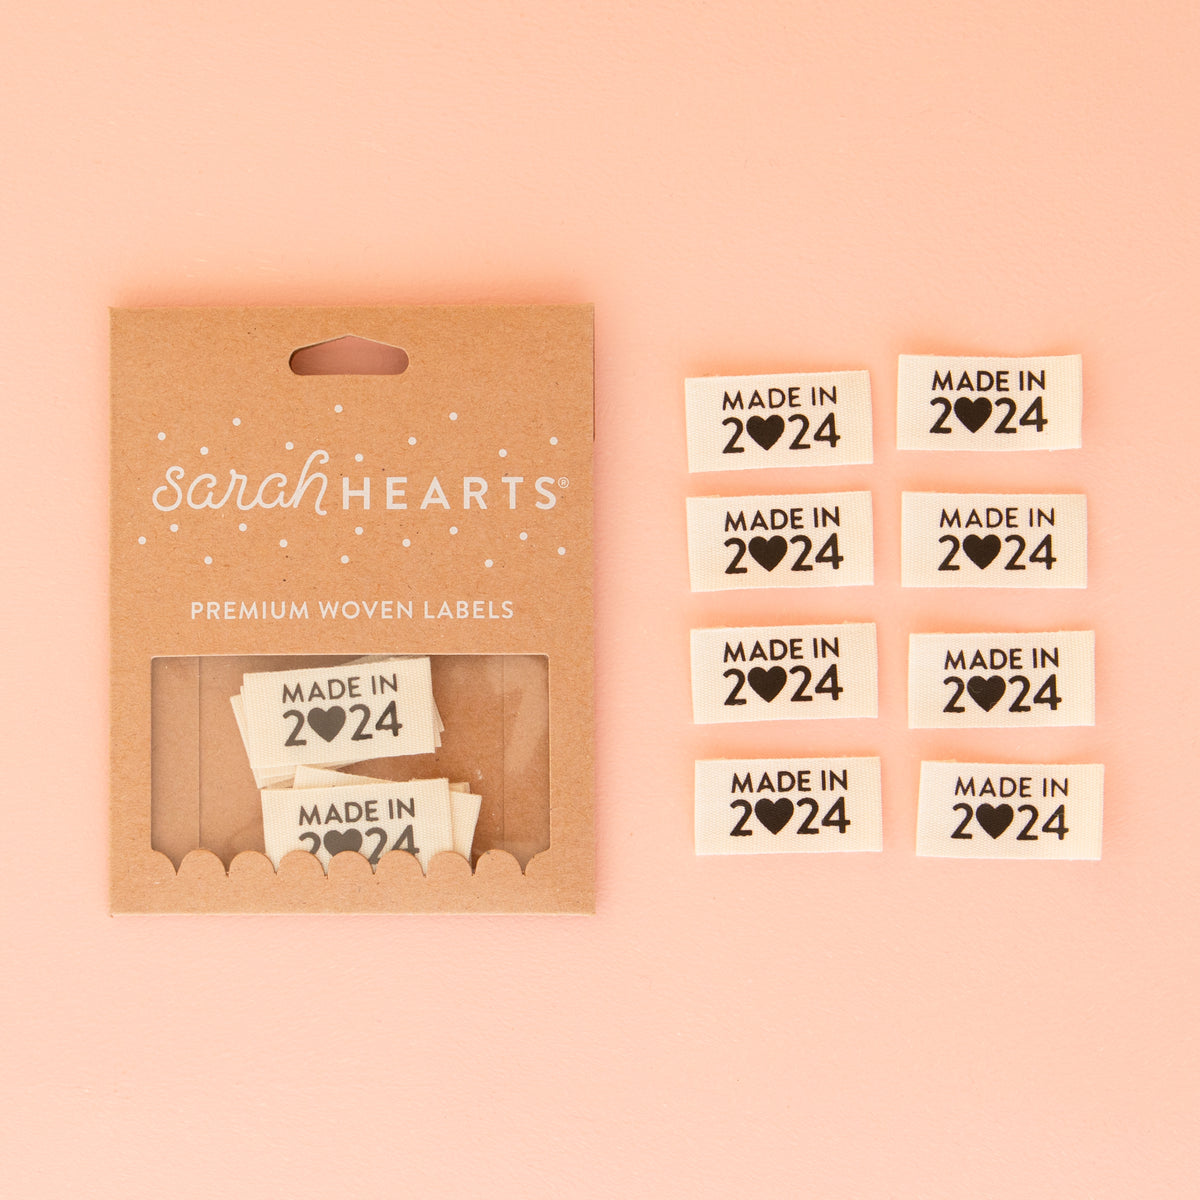 Sarah Hearts Quilt Label - Made in 2024